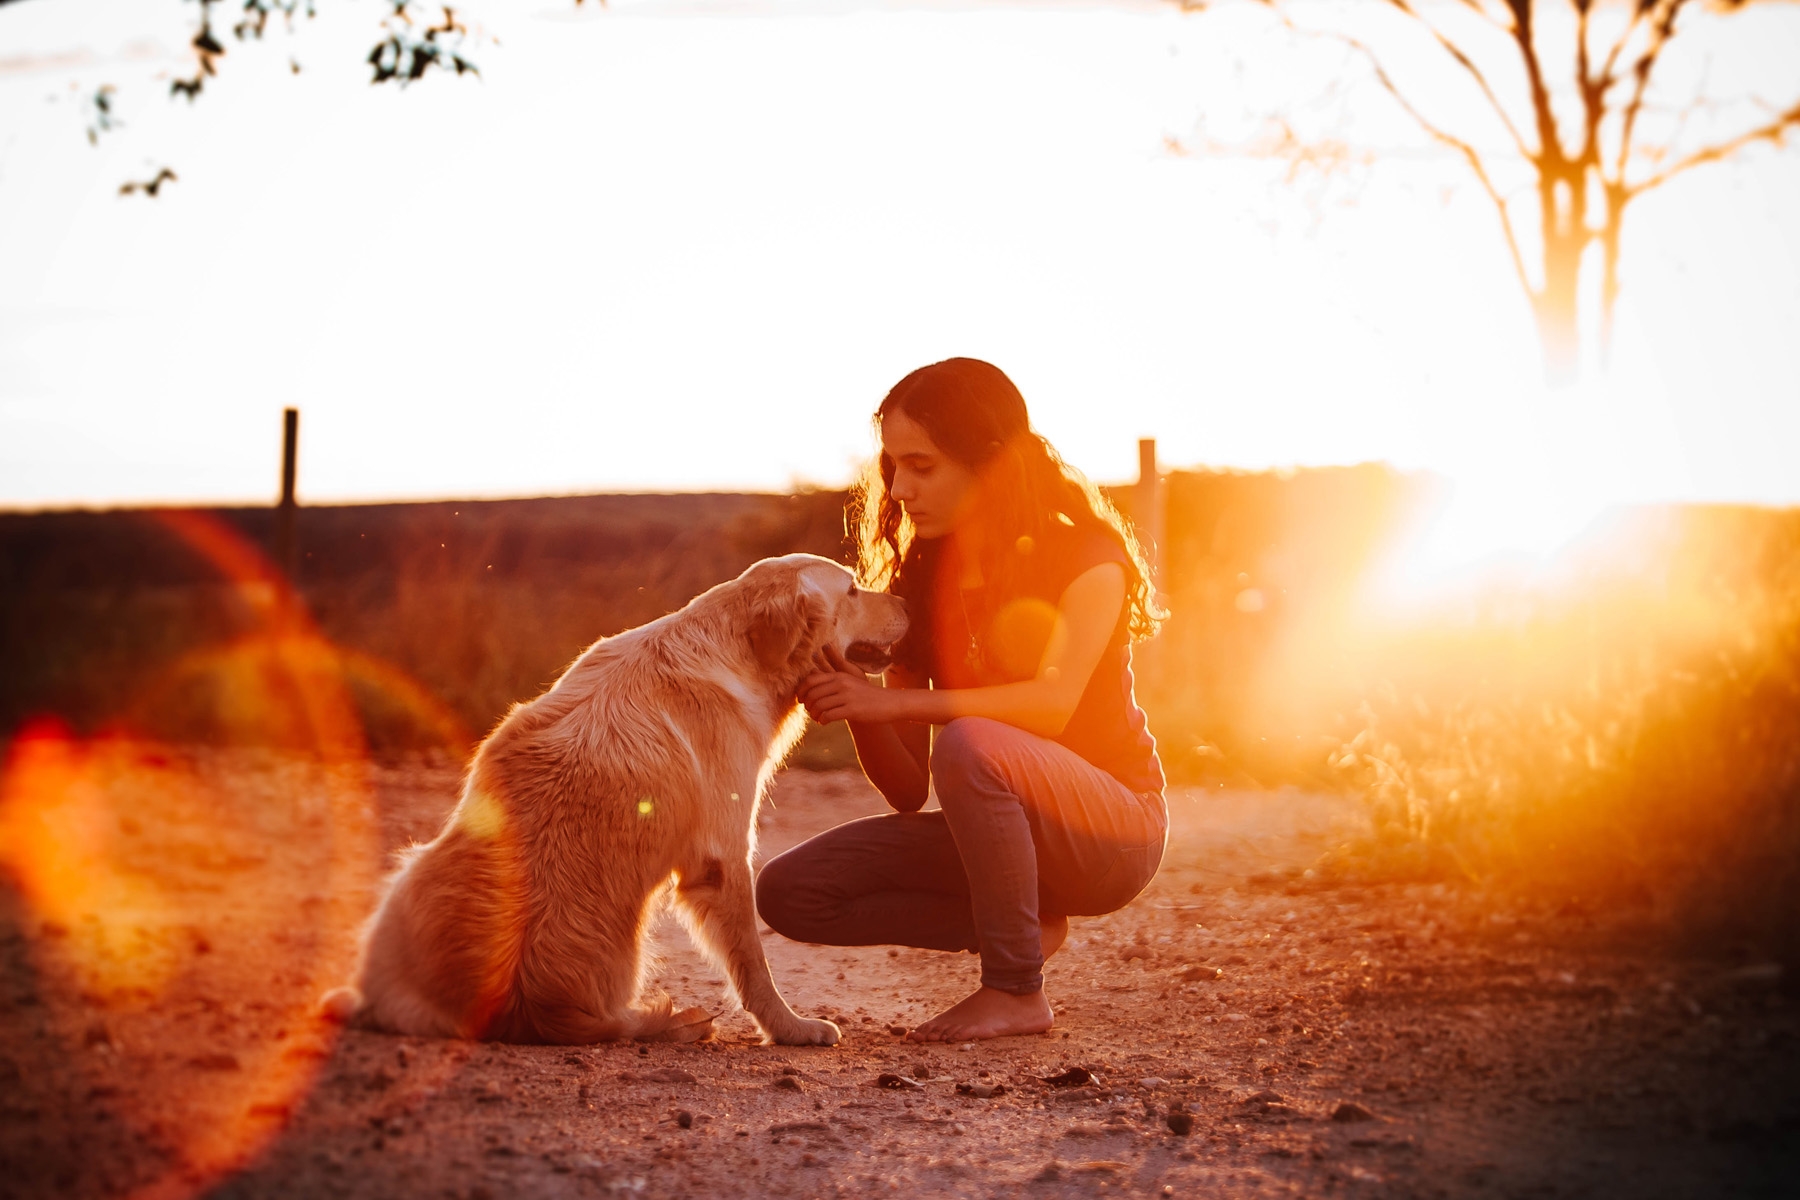 Your life will change after the diagnosis, but you and your dog can still find joy.